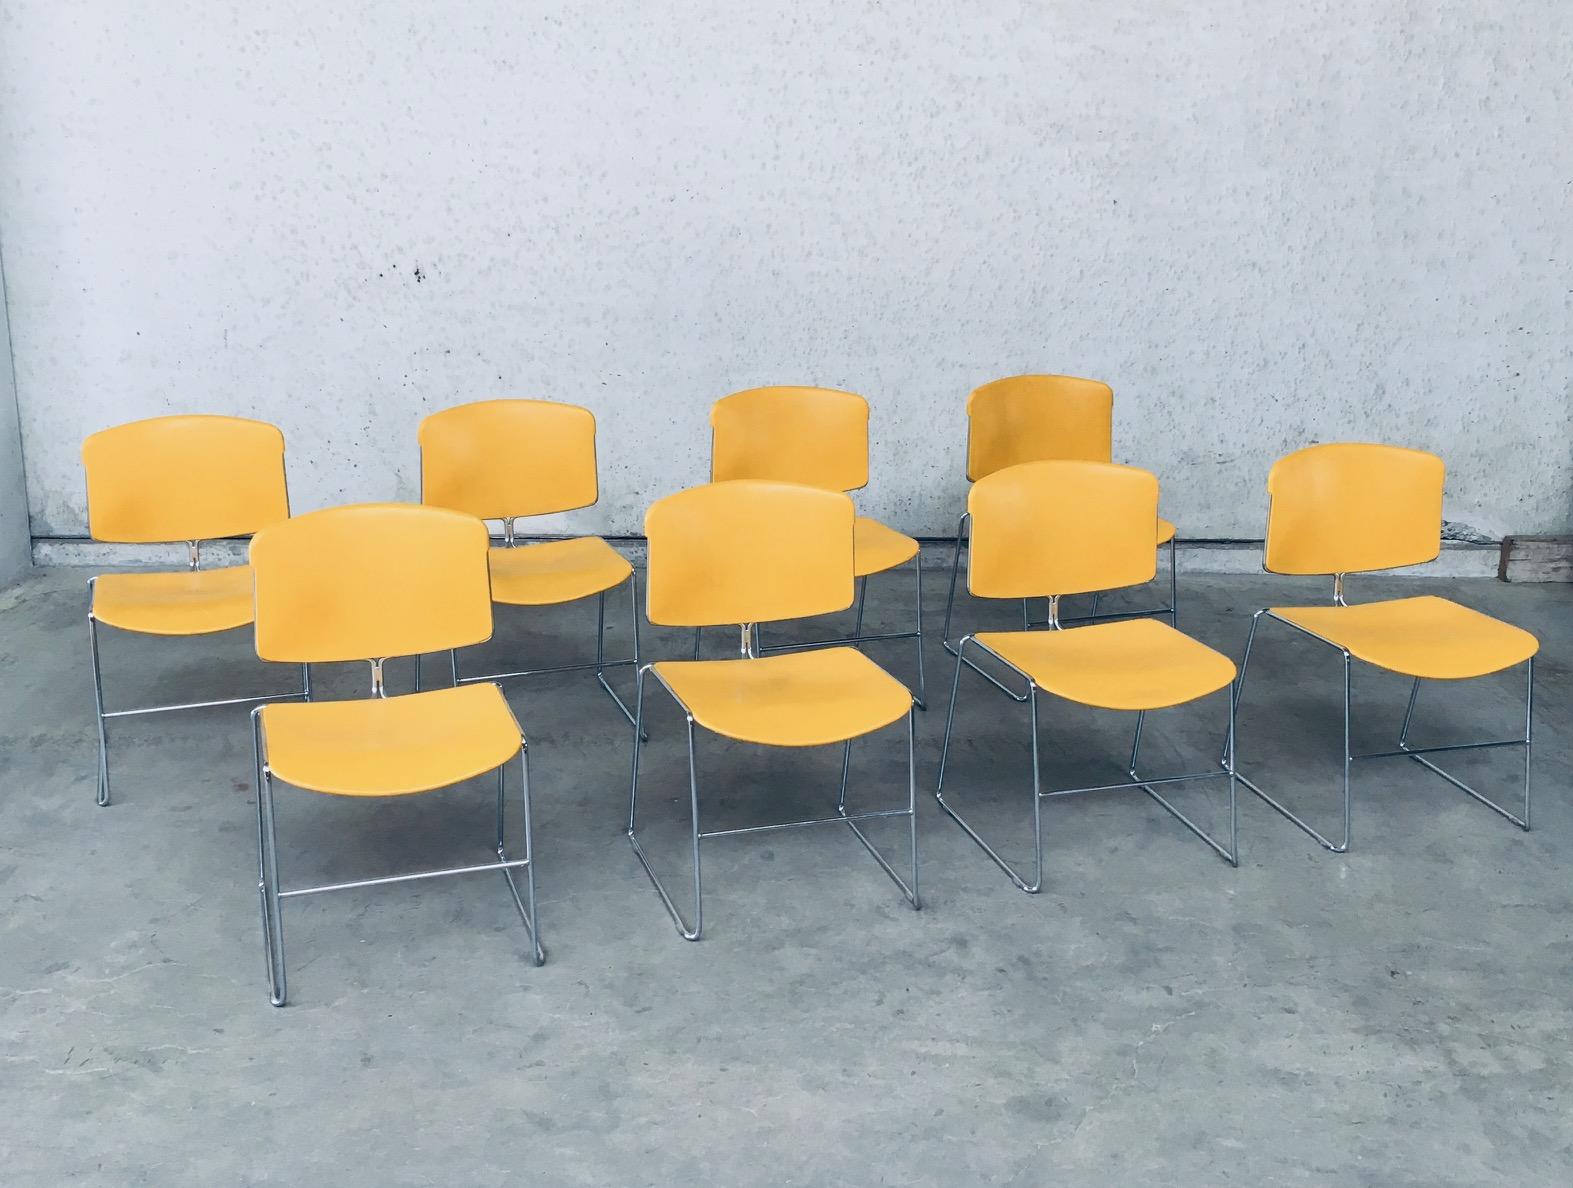 Vintage Original MAX STACKER Conference / Office Chair set of 8 by Steelcase Strafor Edition, made in the USA 1970's / 80's. Yellow plastic seat and back on chrome metal frame. All chairs are patinated with traces of their use in the yellow plastic